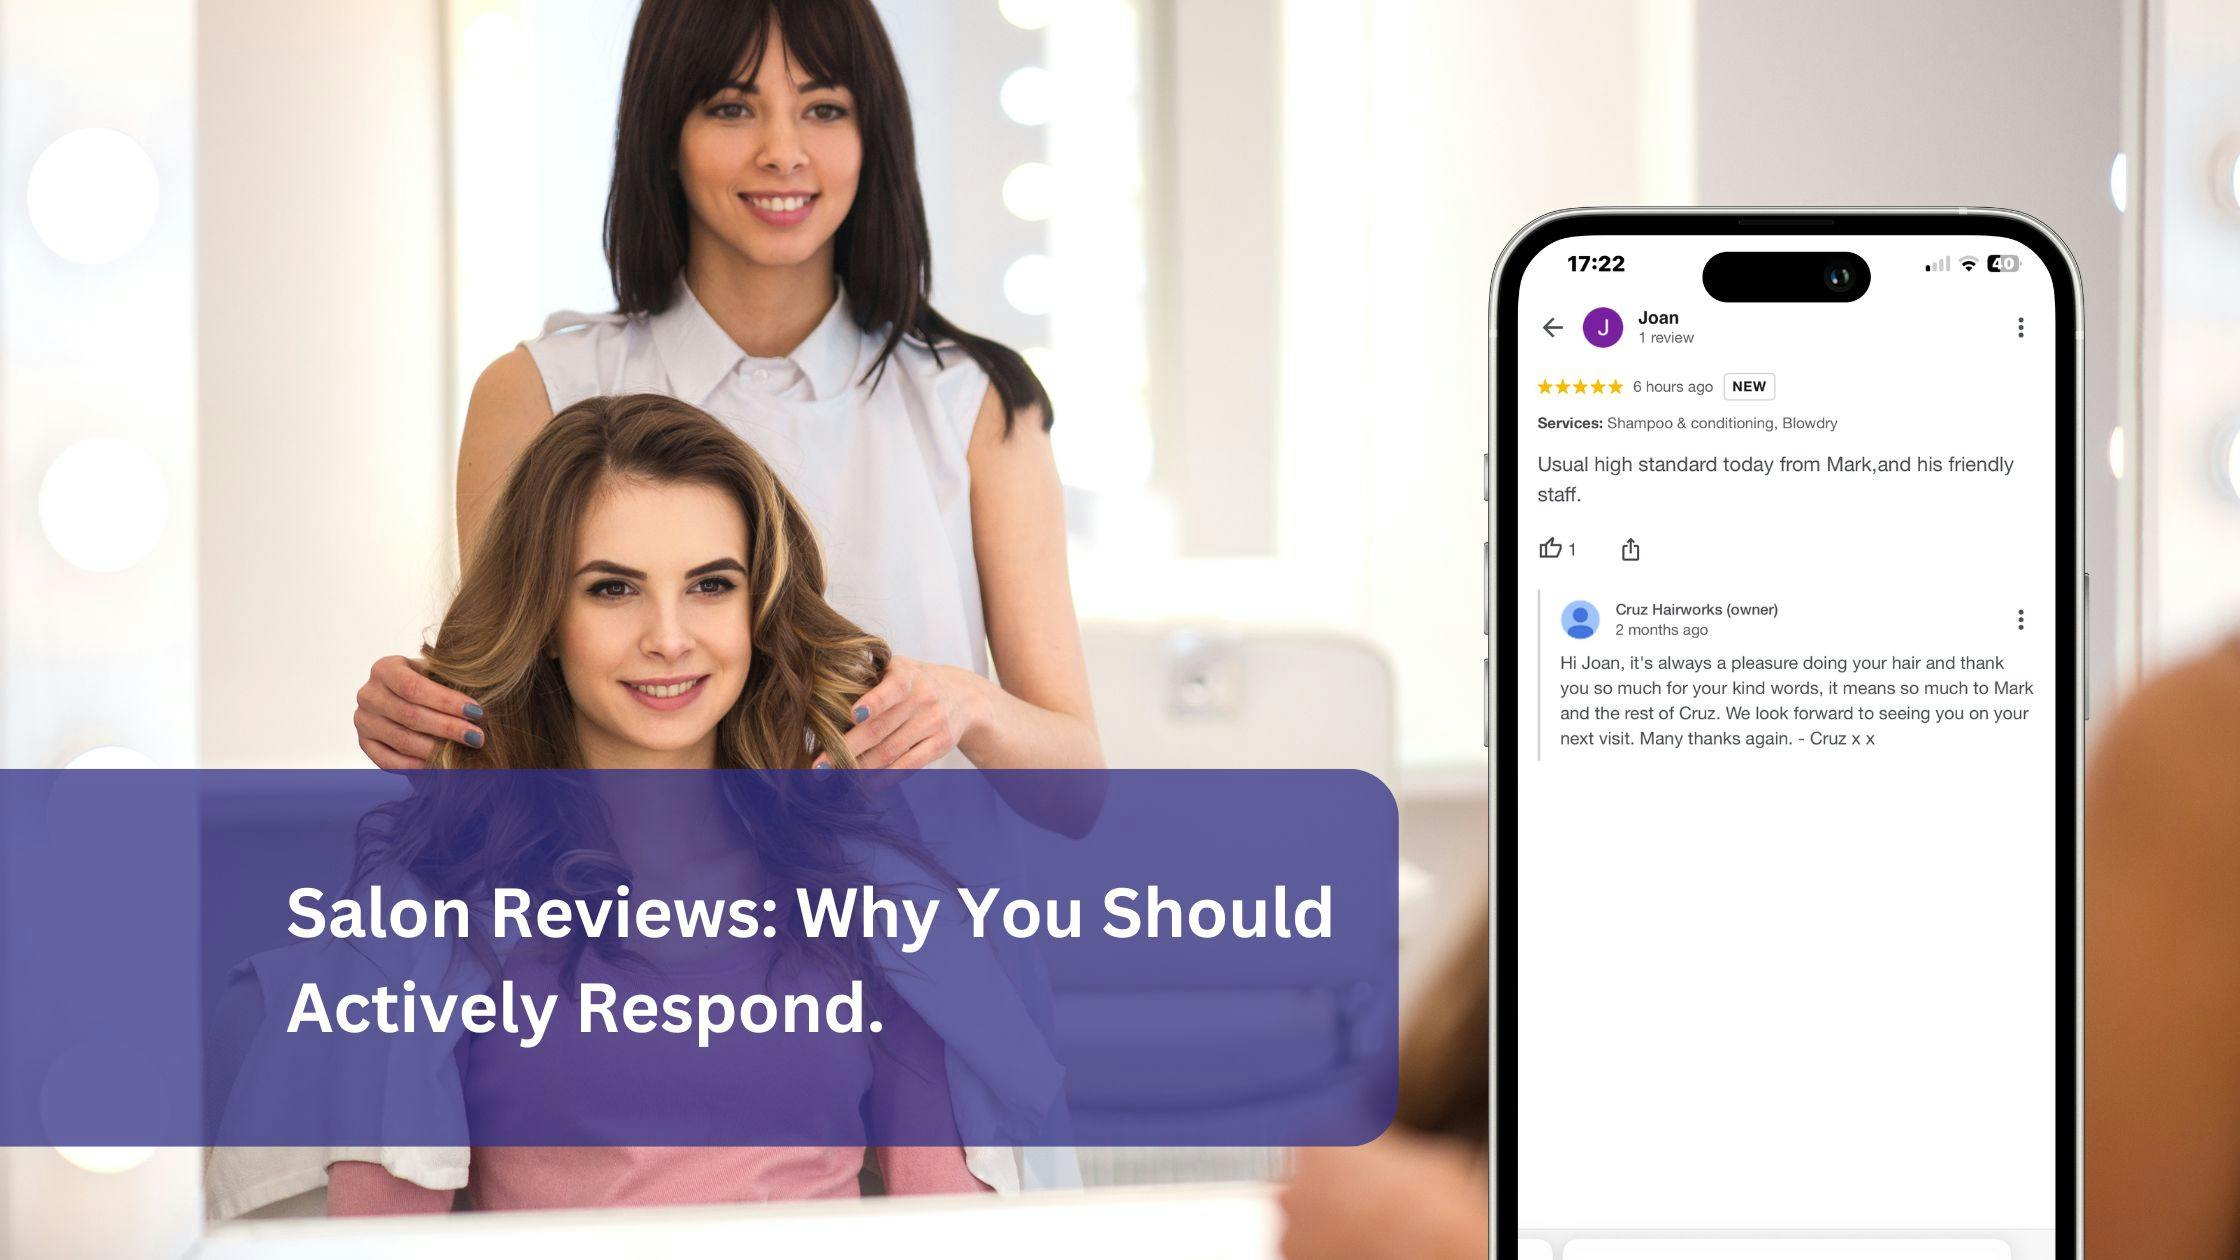 Salon Reviews: Why You Should Actively Respond